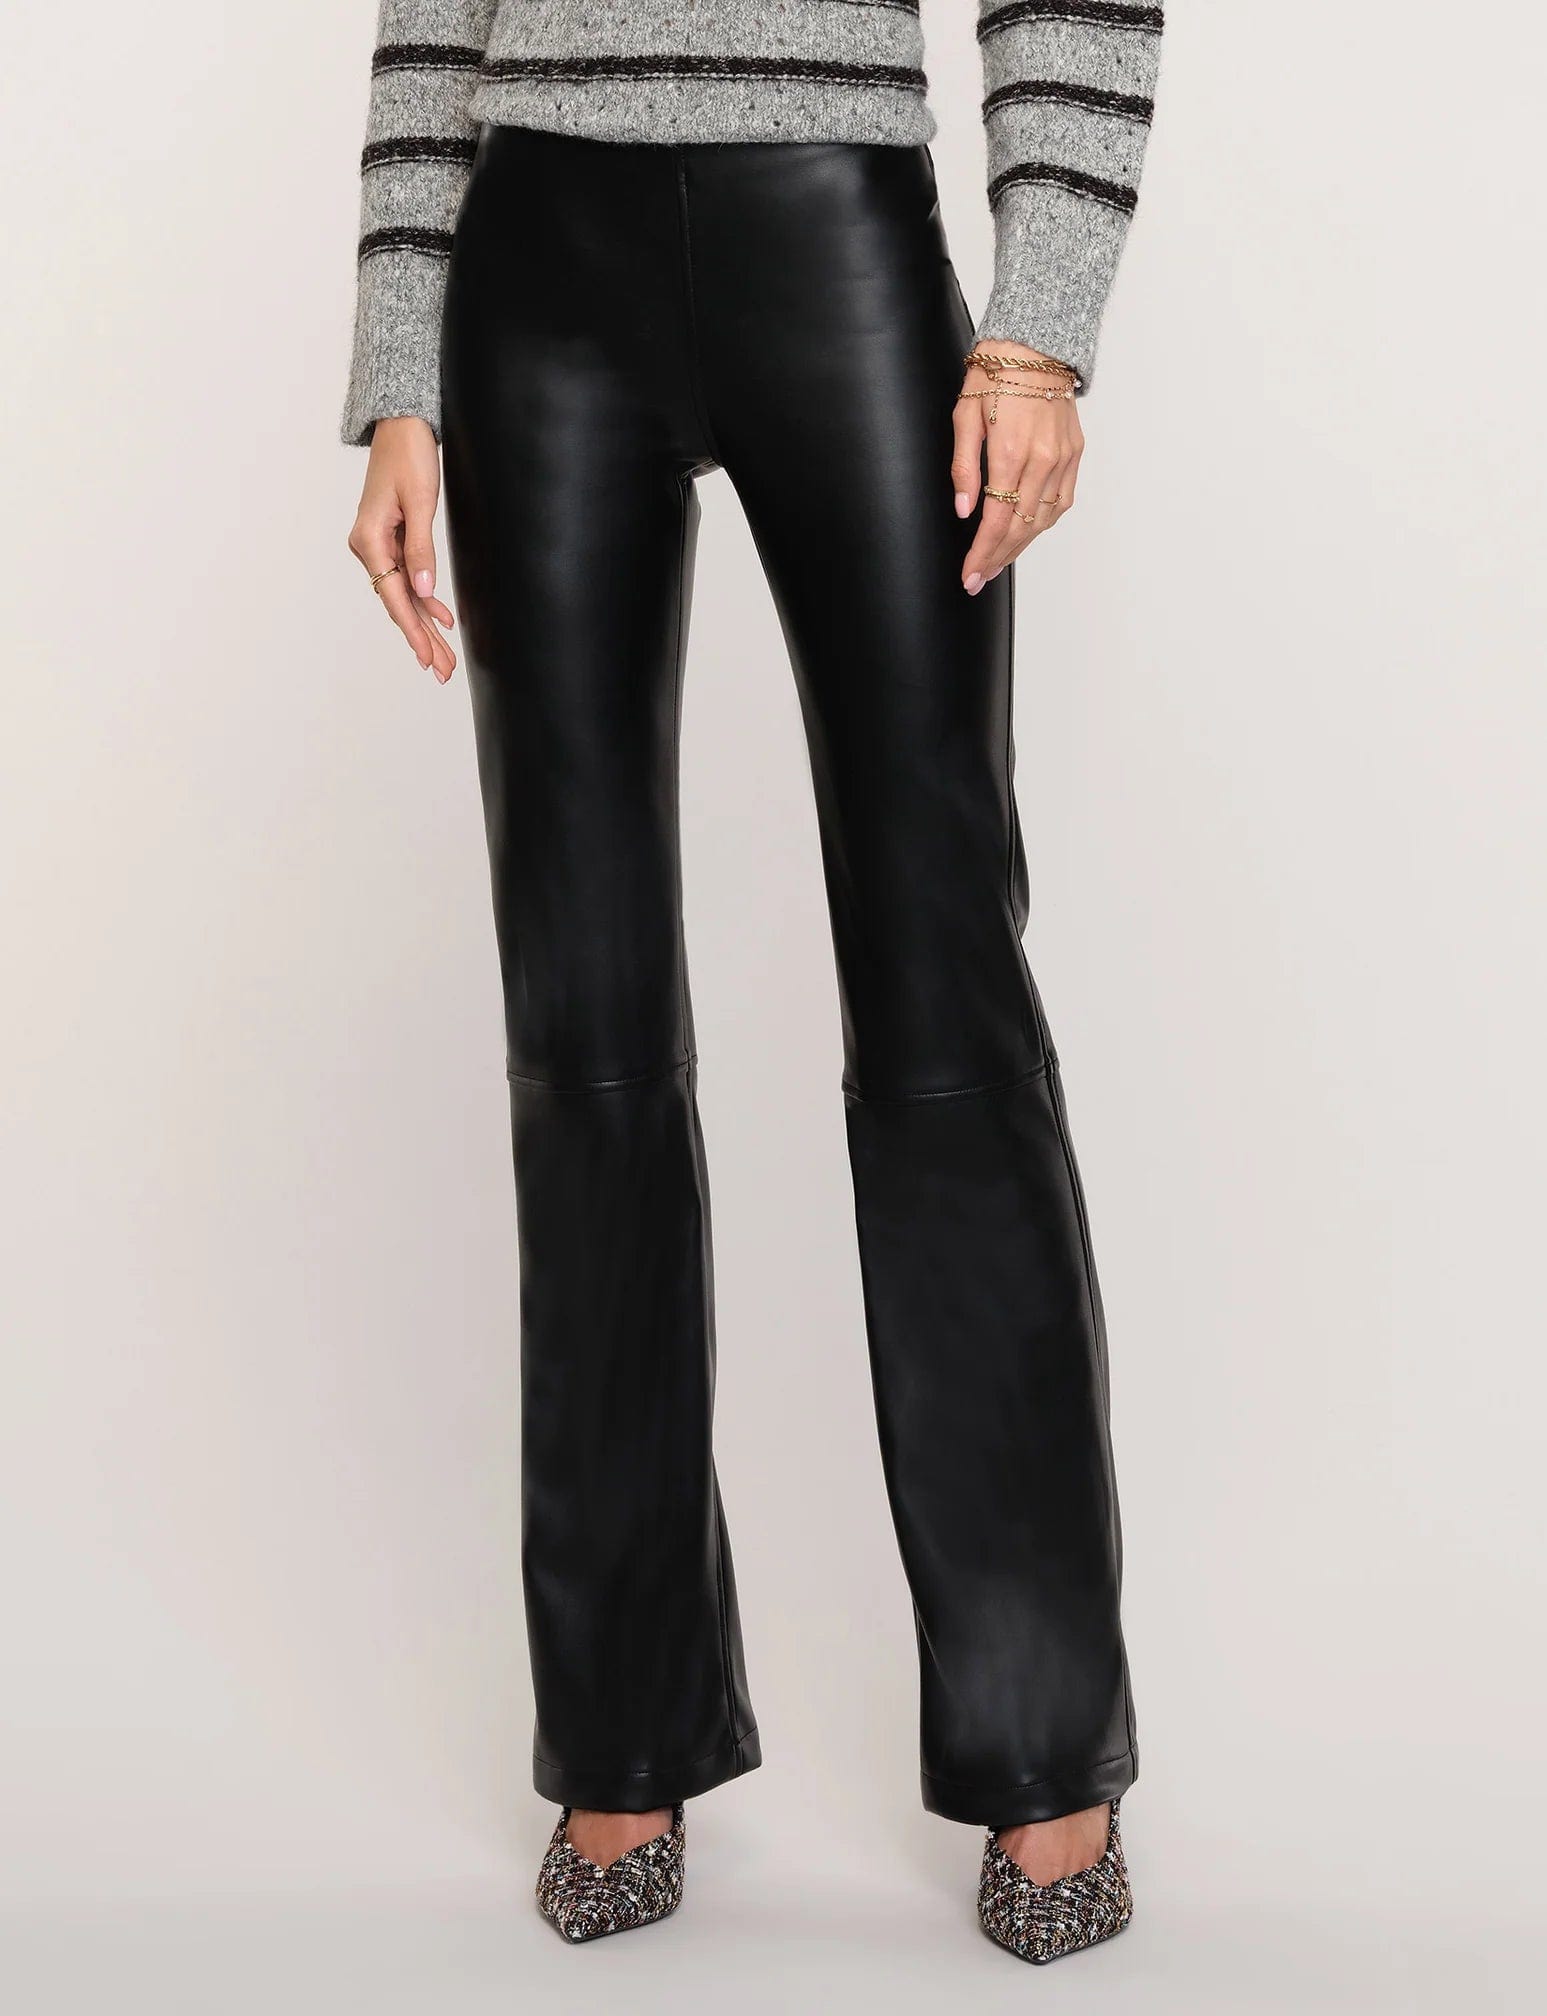 Faux Leather Pull On Heartloom Farris Pants in Black